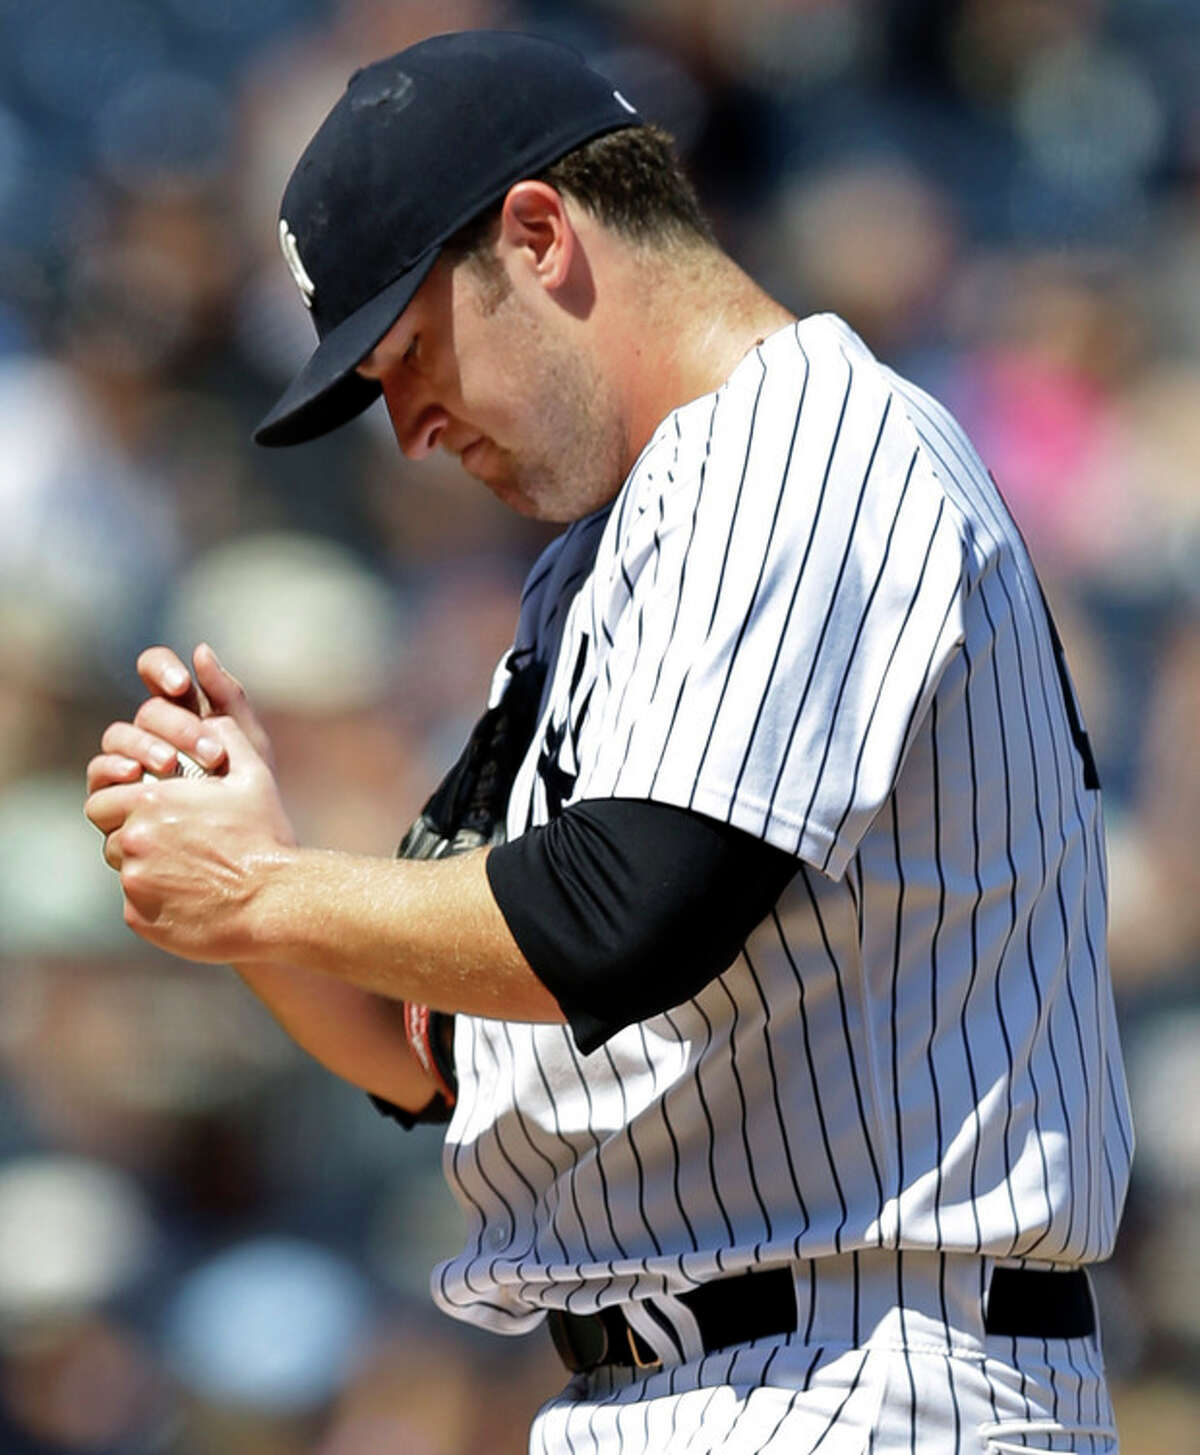 New York Yankees starting pitcher Phil Hughes reacts after allowing a fourth-inning solo home run to Los Angeles Angels' Chris Nelson in a baseball game, Thursday, Aug. 15, 2013, in New York. (AP Photo/Kathy Willens)